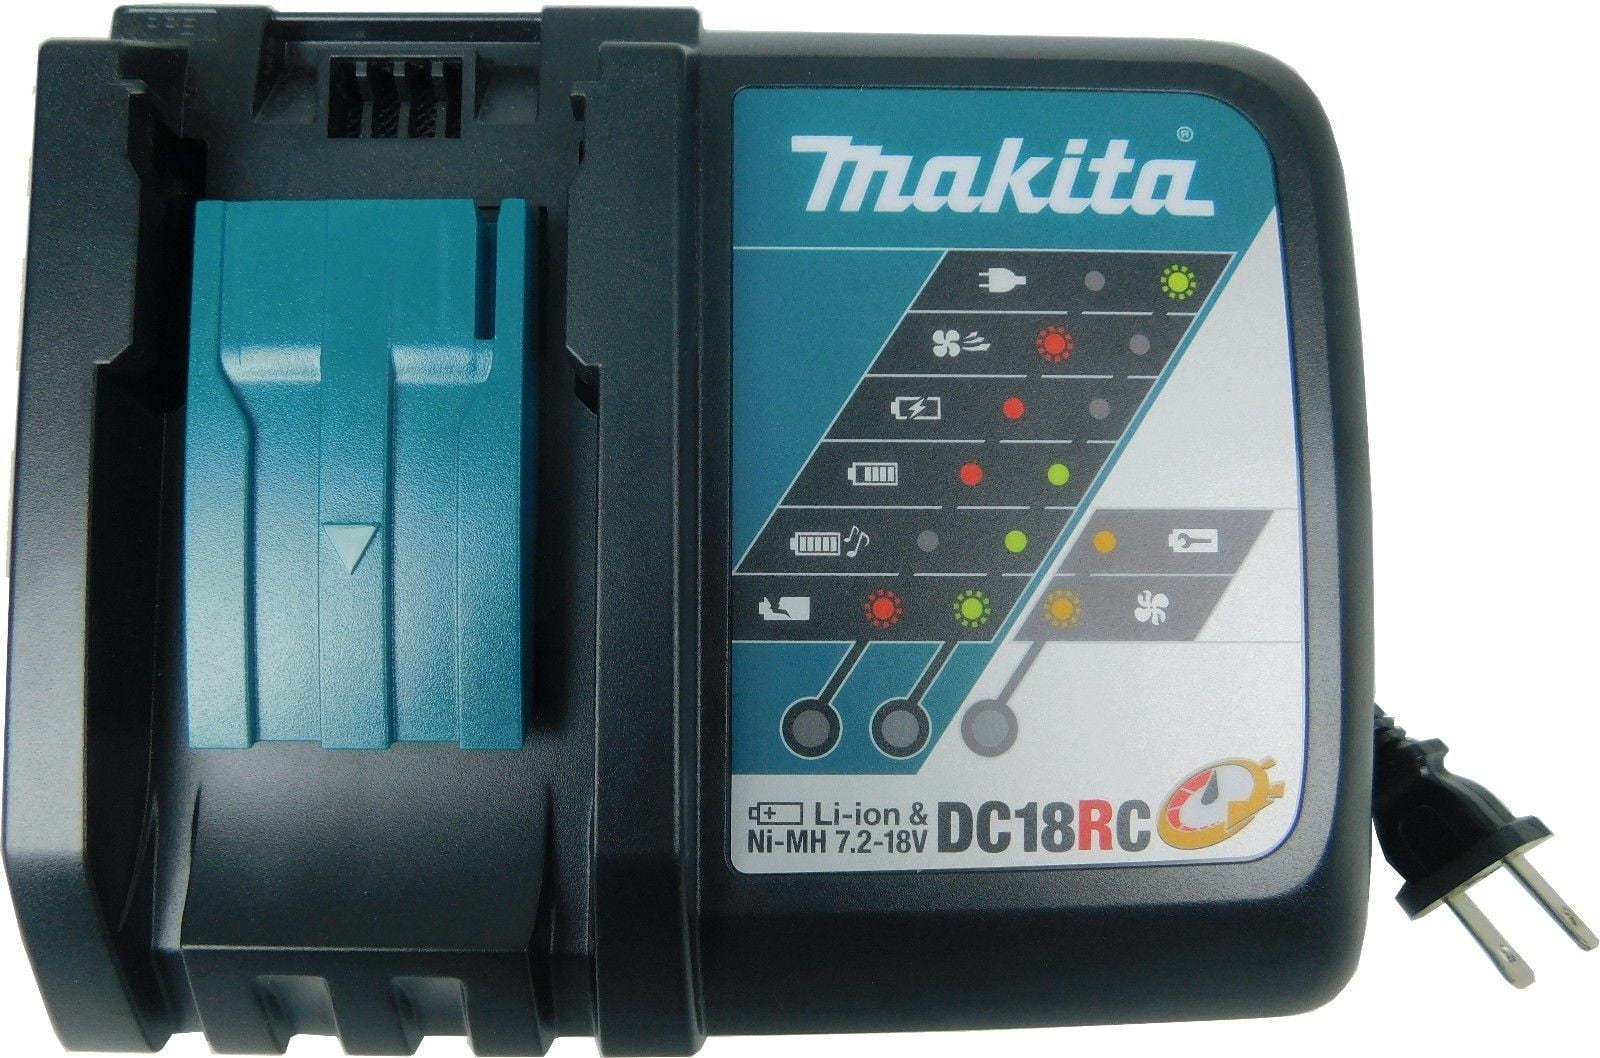 For Fast Rapid Battery Charger for Makita DC18RC Li-ion LXT 7.2 18V Two Port UK 